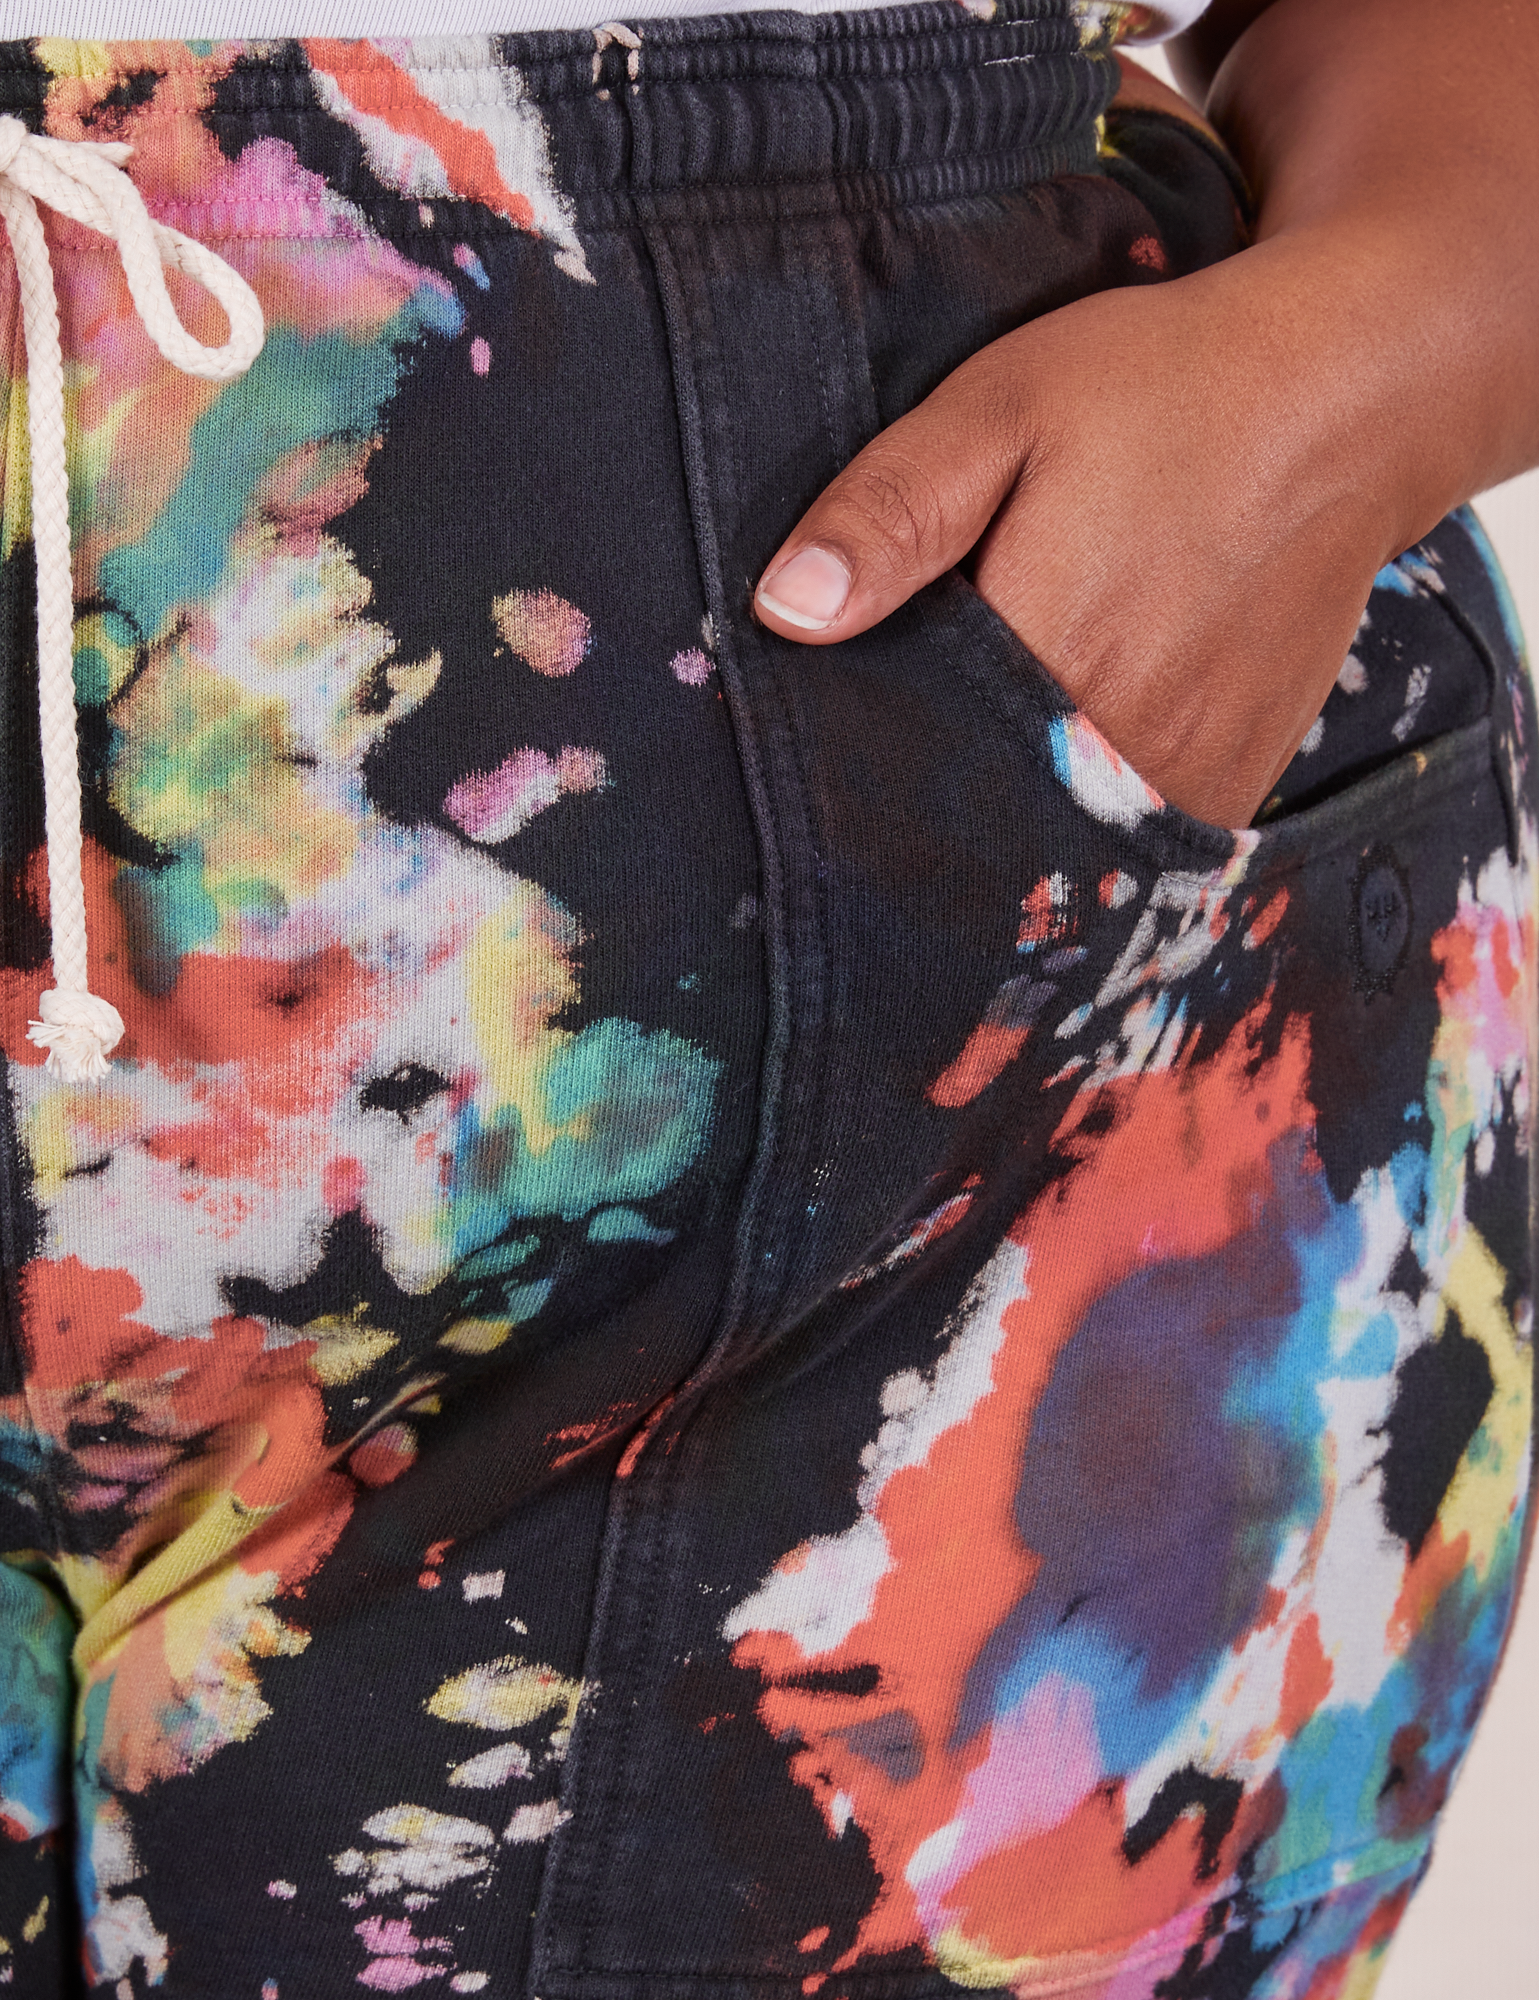 Sweat Shorts in Rainbow Magic Waters front pocket close up. Morgan has her hand in the pocket.